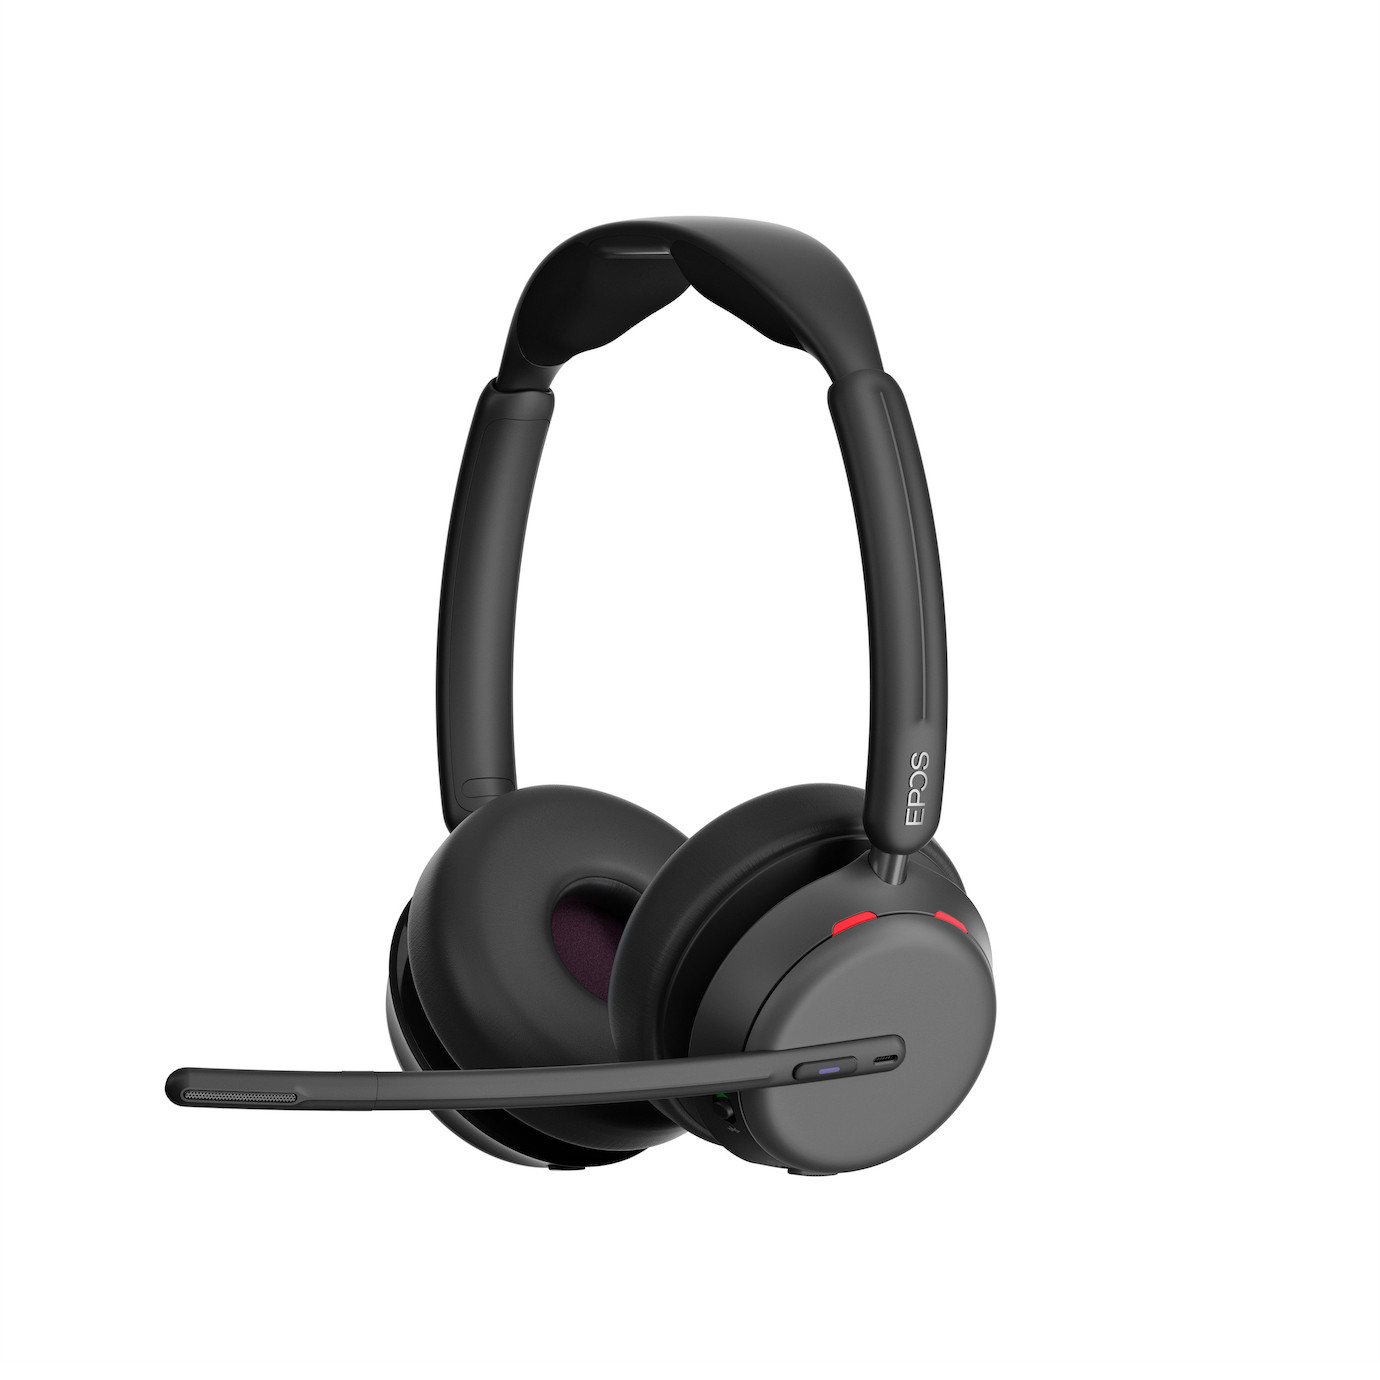 EPOS IMPACT 1061T ANC Stereo Bluetooth Headset Teams zertifiziert mit Active Noice Cancelling (ANC) 